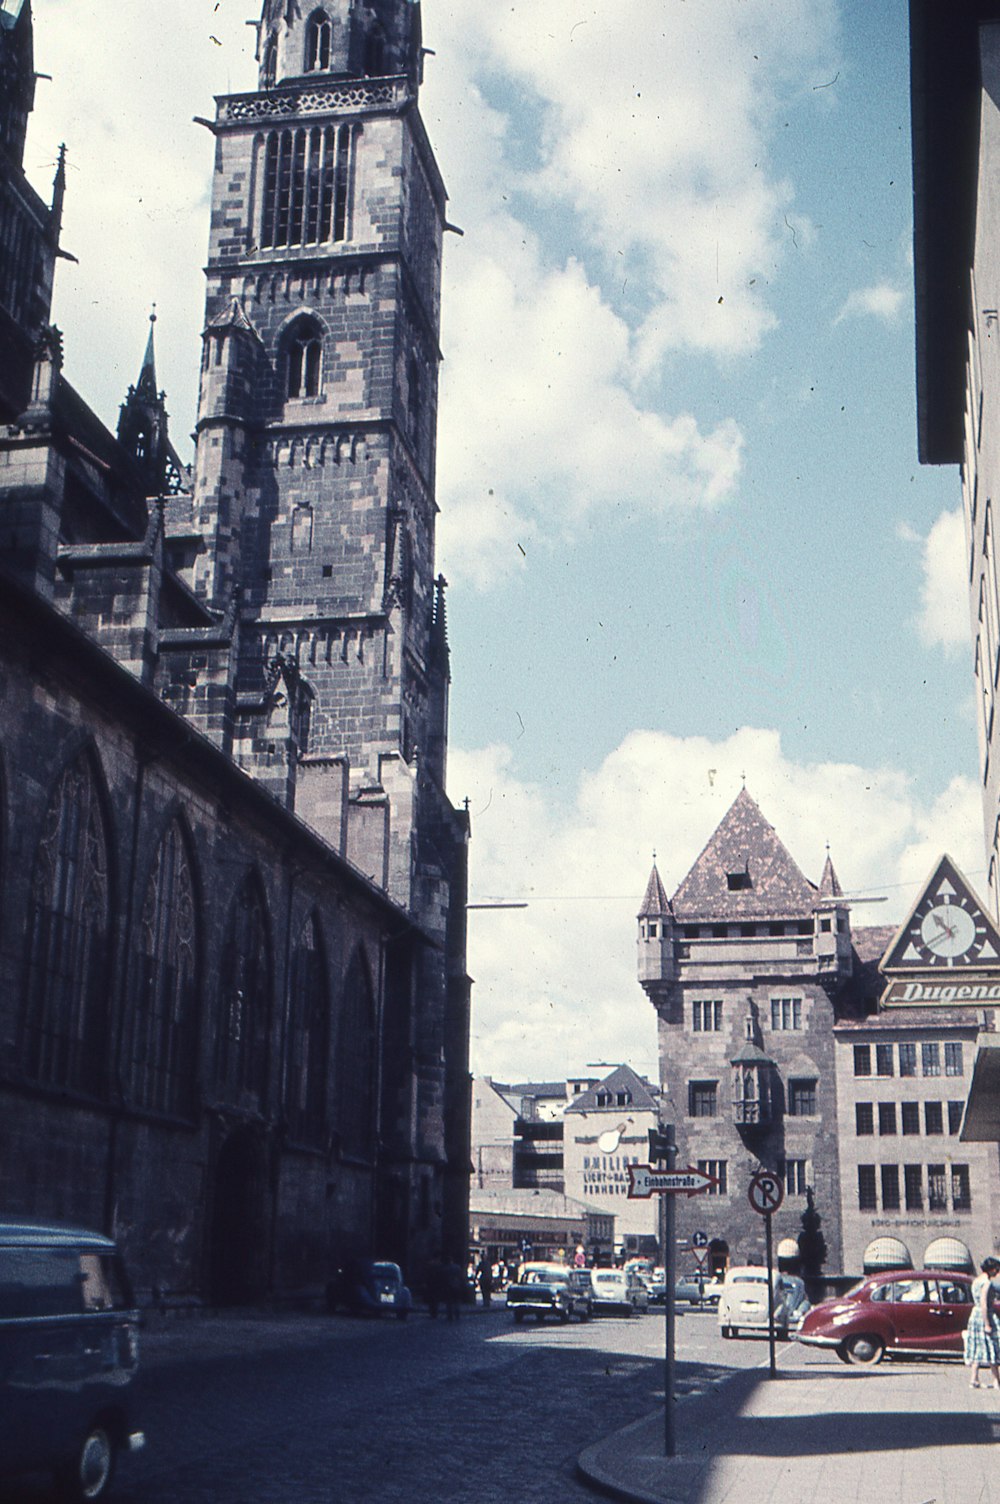 an old photo of a city street with a clock tower in the background